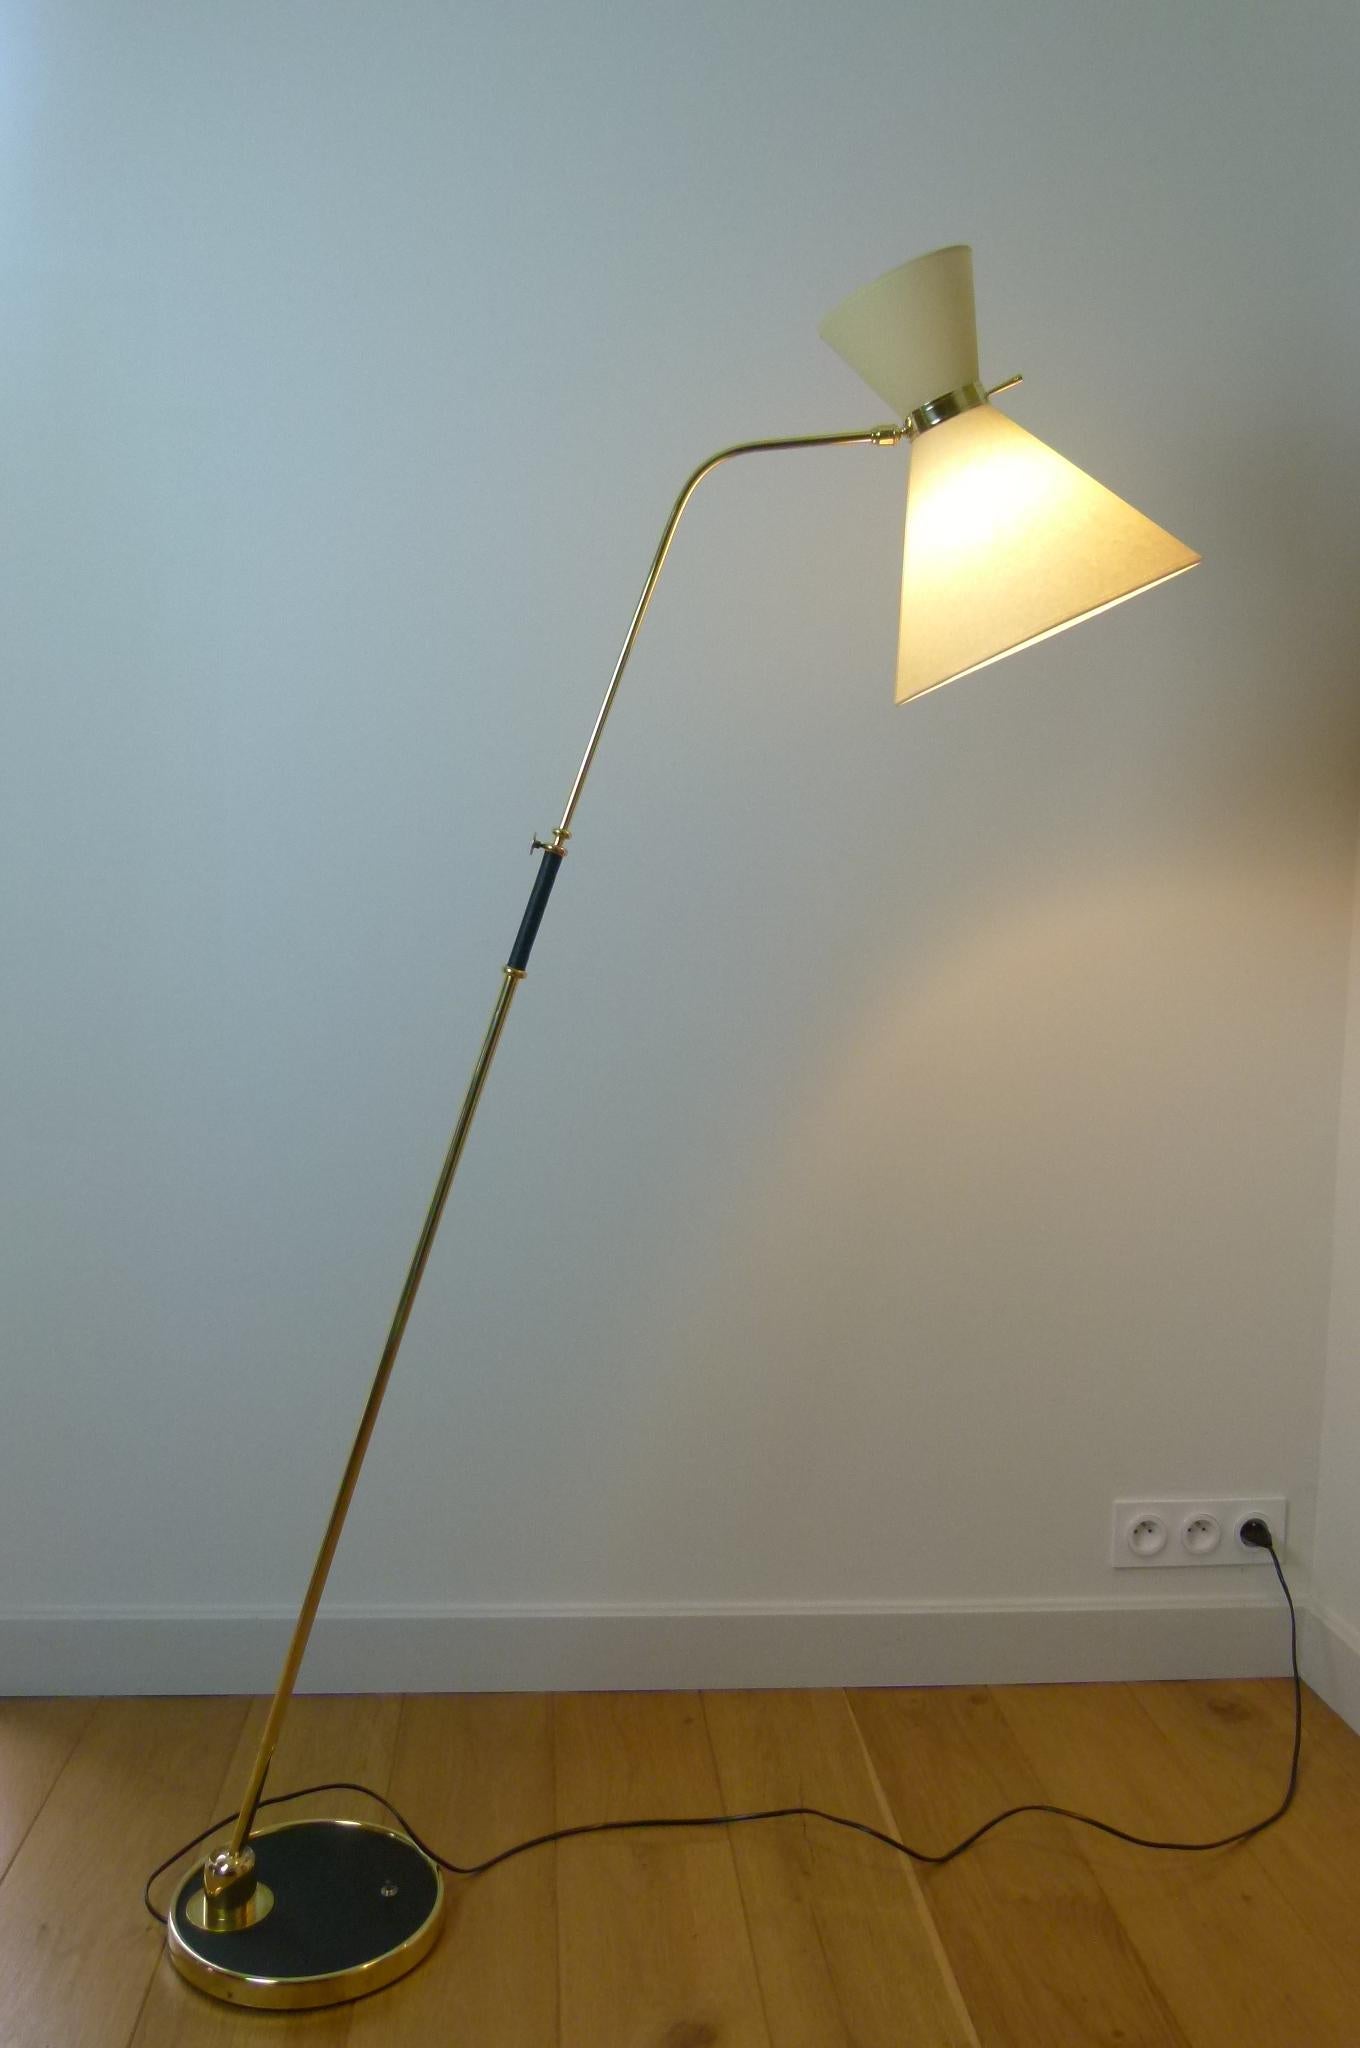 Floor lamp with pendulum, composed of a circular base sheathed in black leather, and certied with a brass ring, on which is placed an adjustable sconce by a ball joint at its base.
The height of the arm and adjustable from 160 to 190 cm high.
The